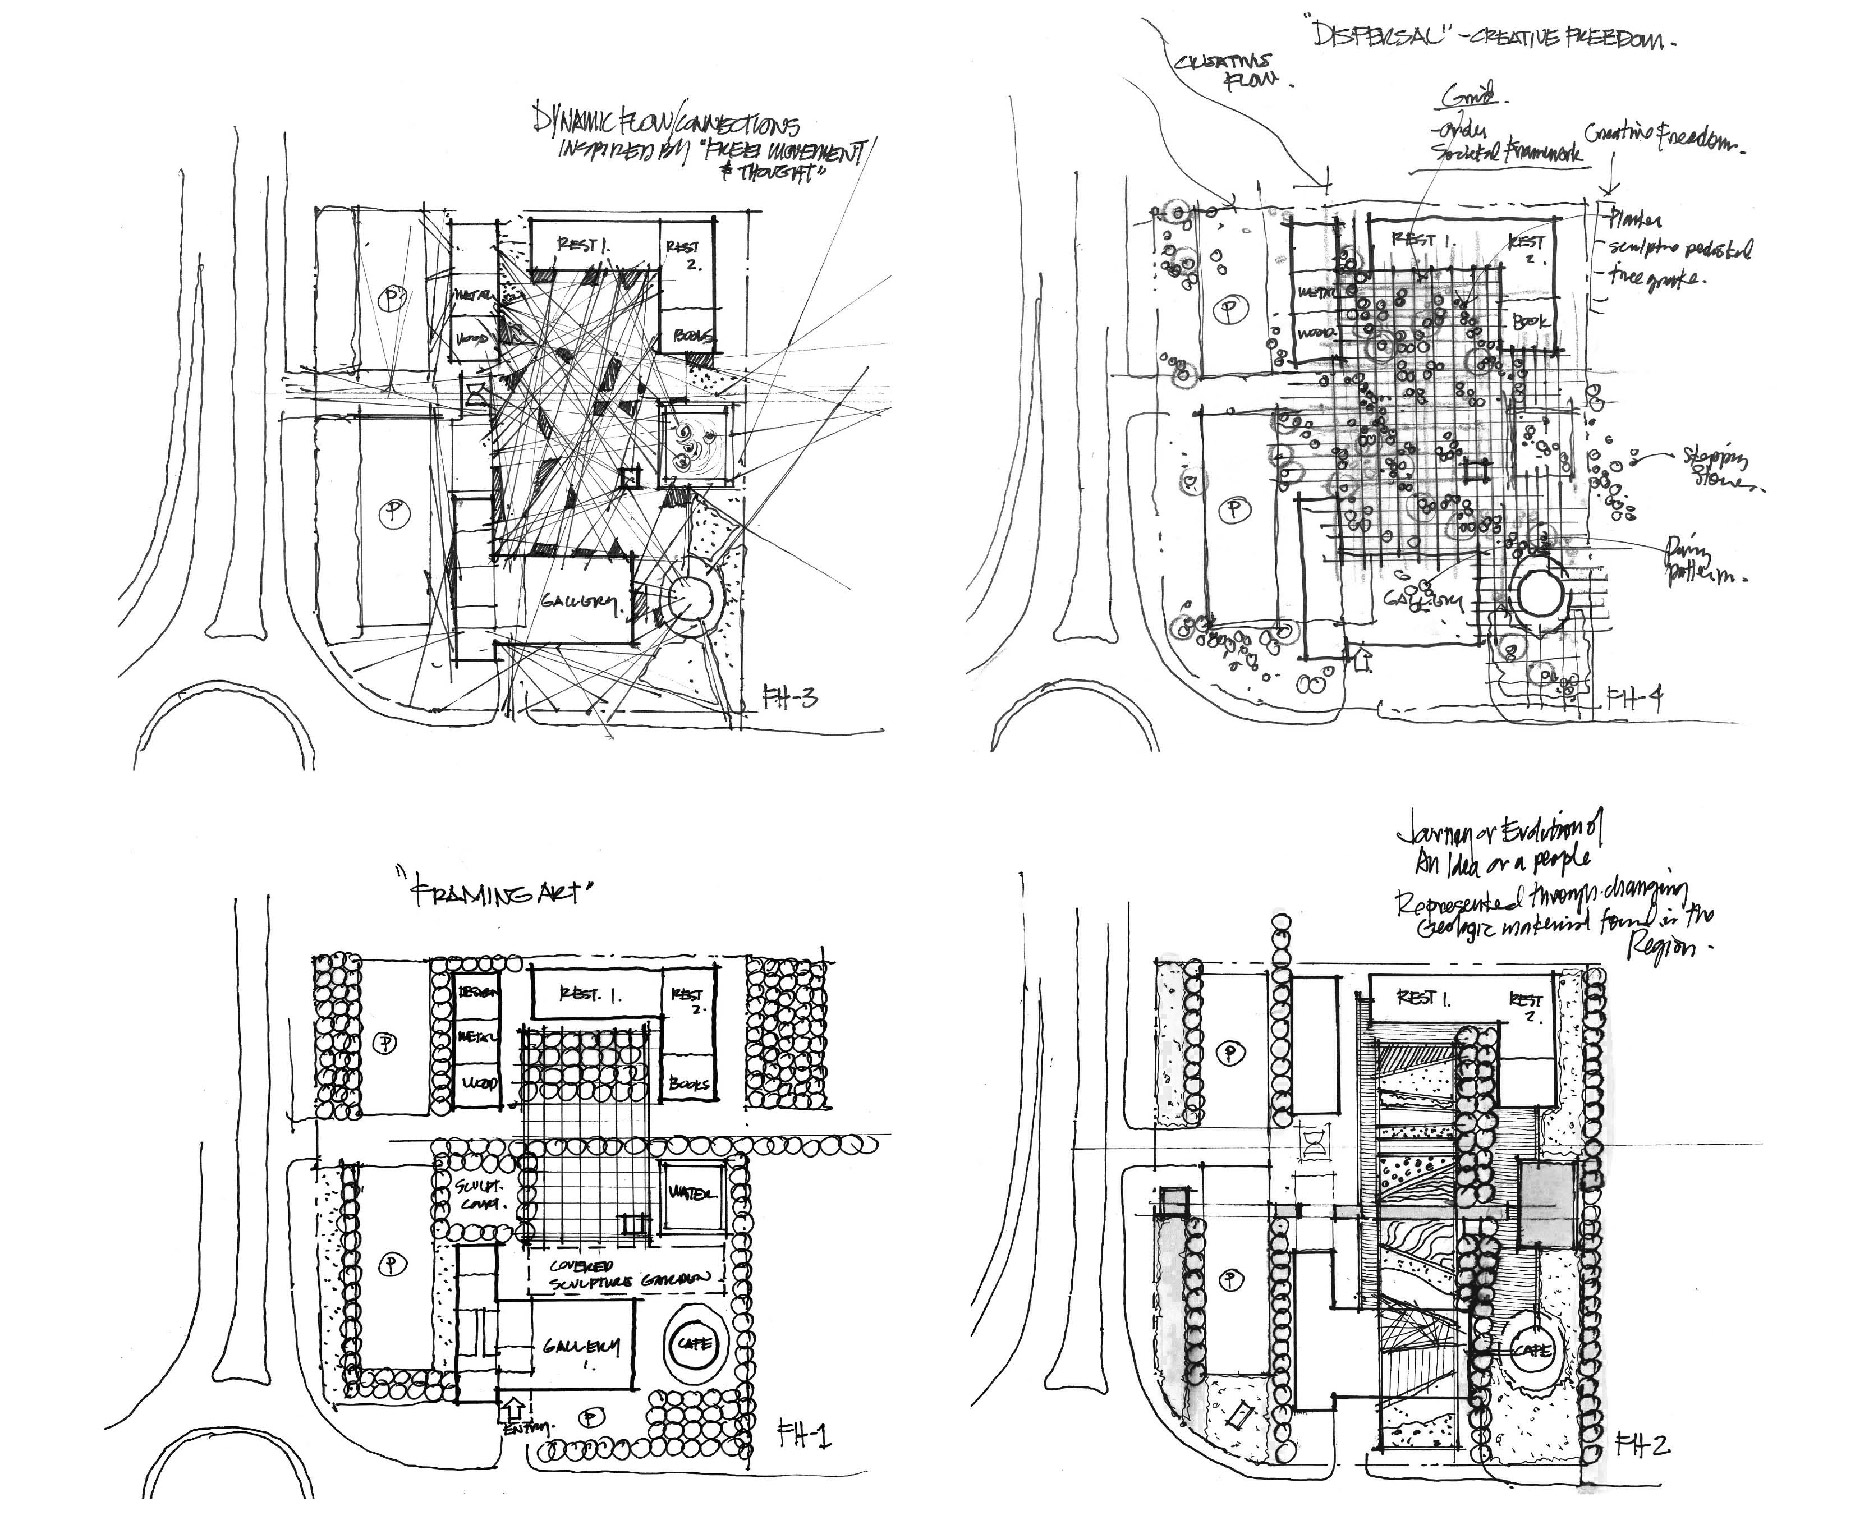 Fire Station concept sketches-01.jpg